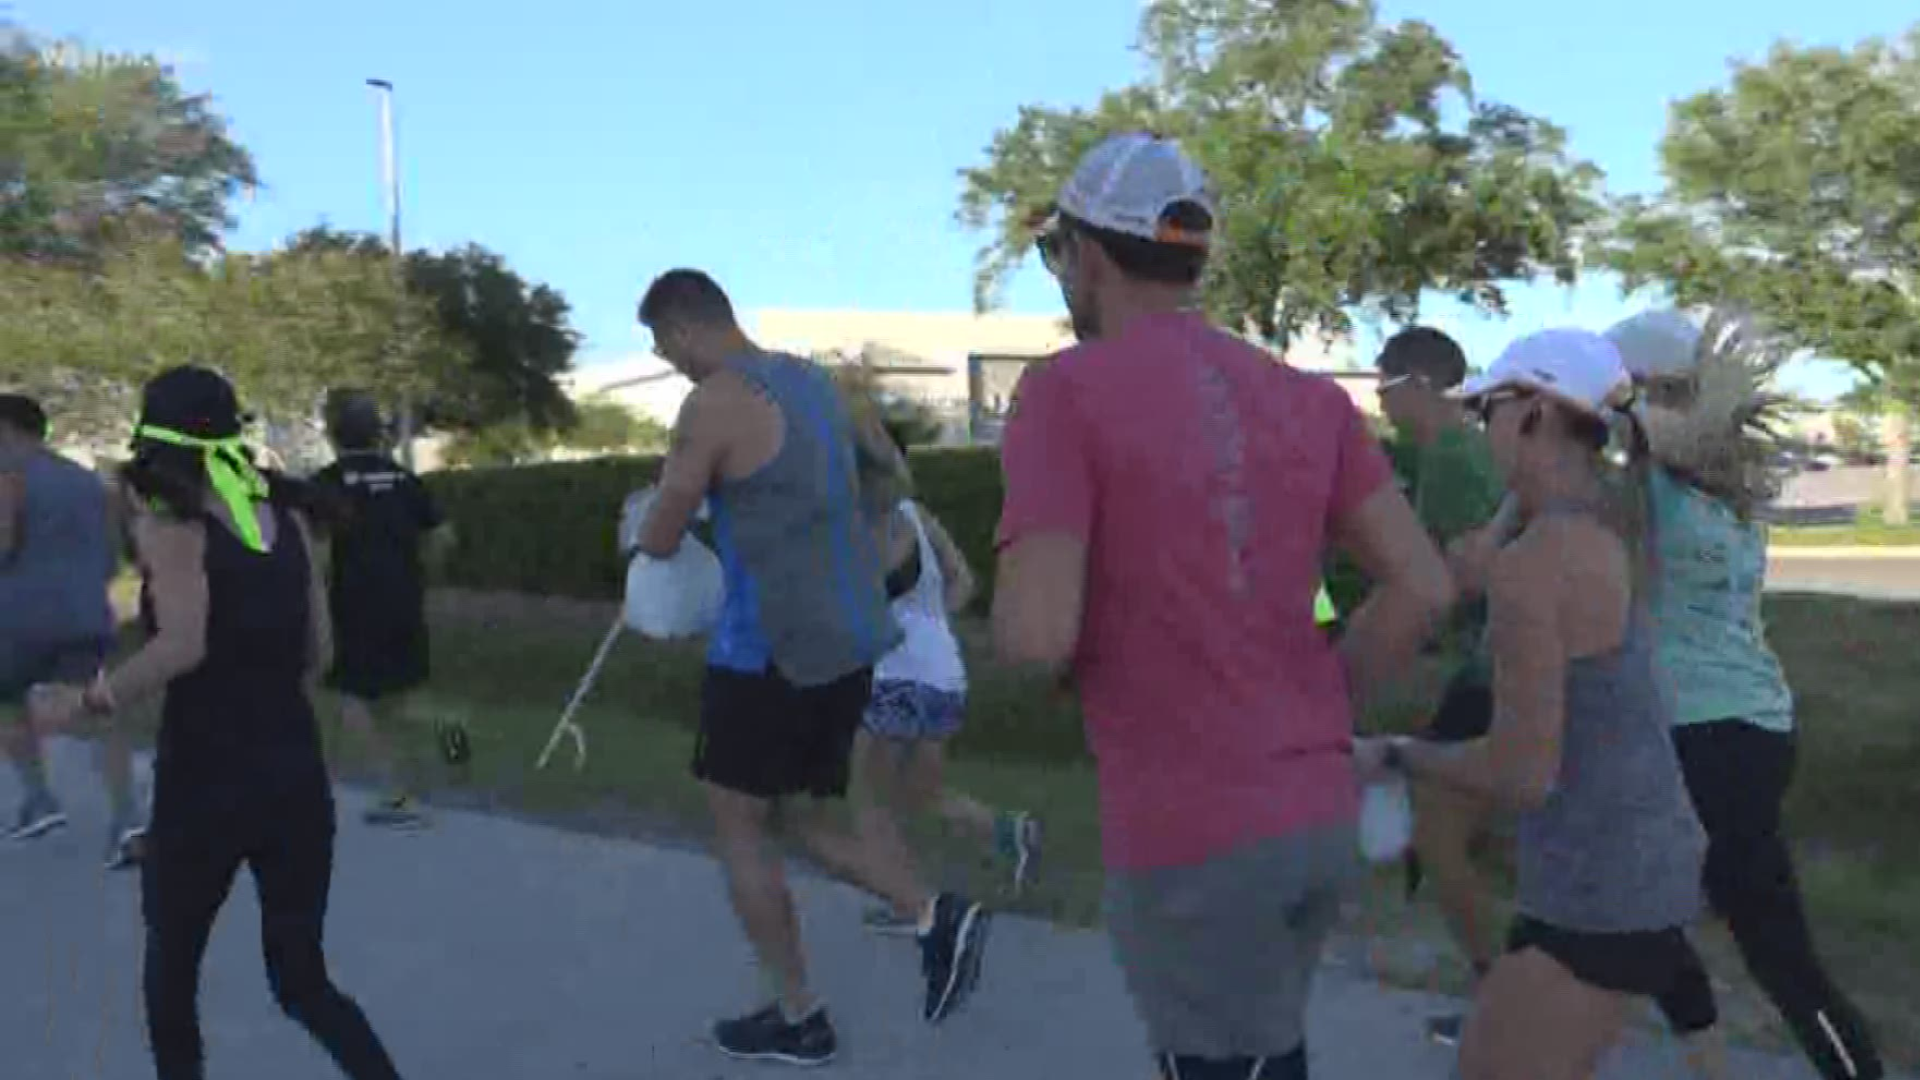 Joggers are picking up garbage, doing good while getting into shape.